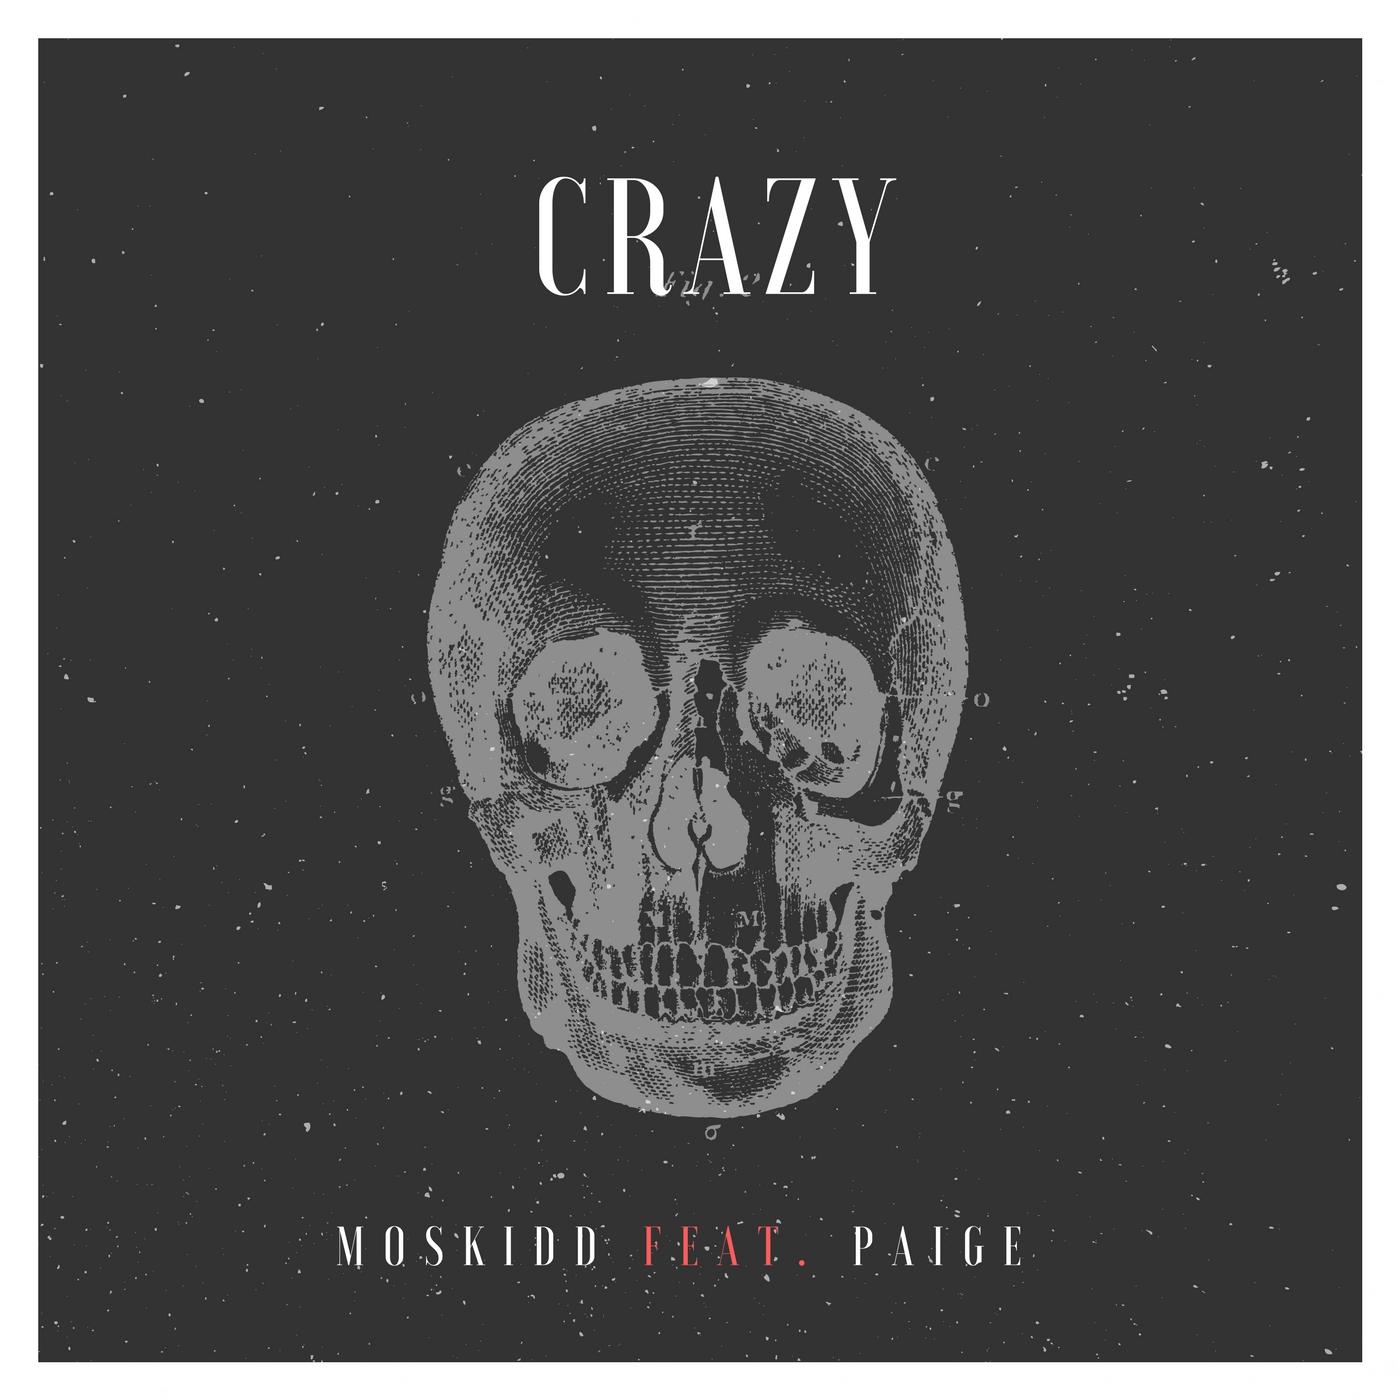 Moskidd feat. Paige - Crazy